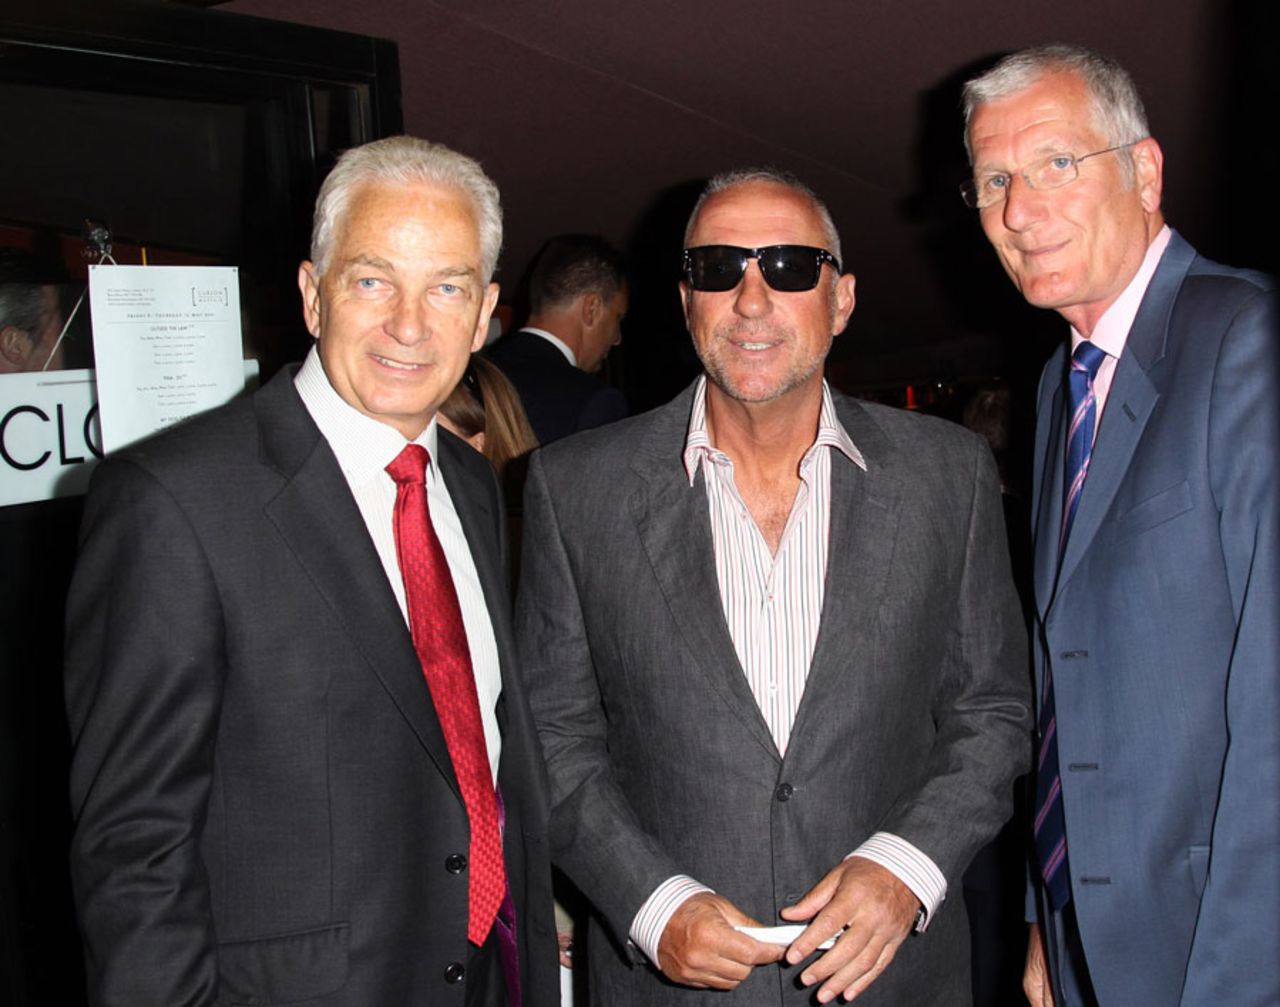 David Gower, Ian Botham and Bob Willis arrive for the world premiere of <i>From the Ashes</i>, London, May 10, 2011